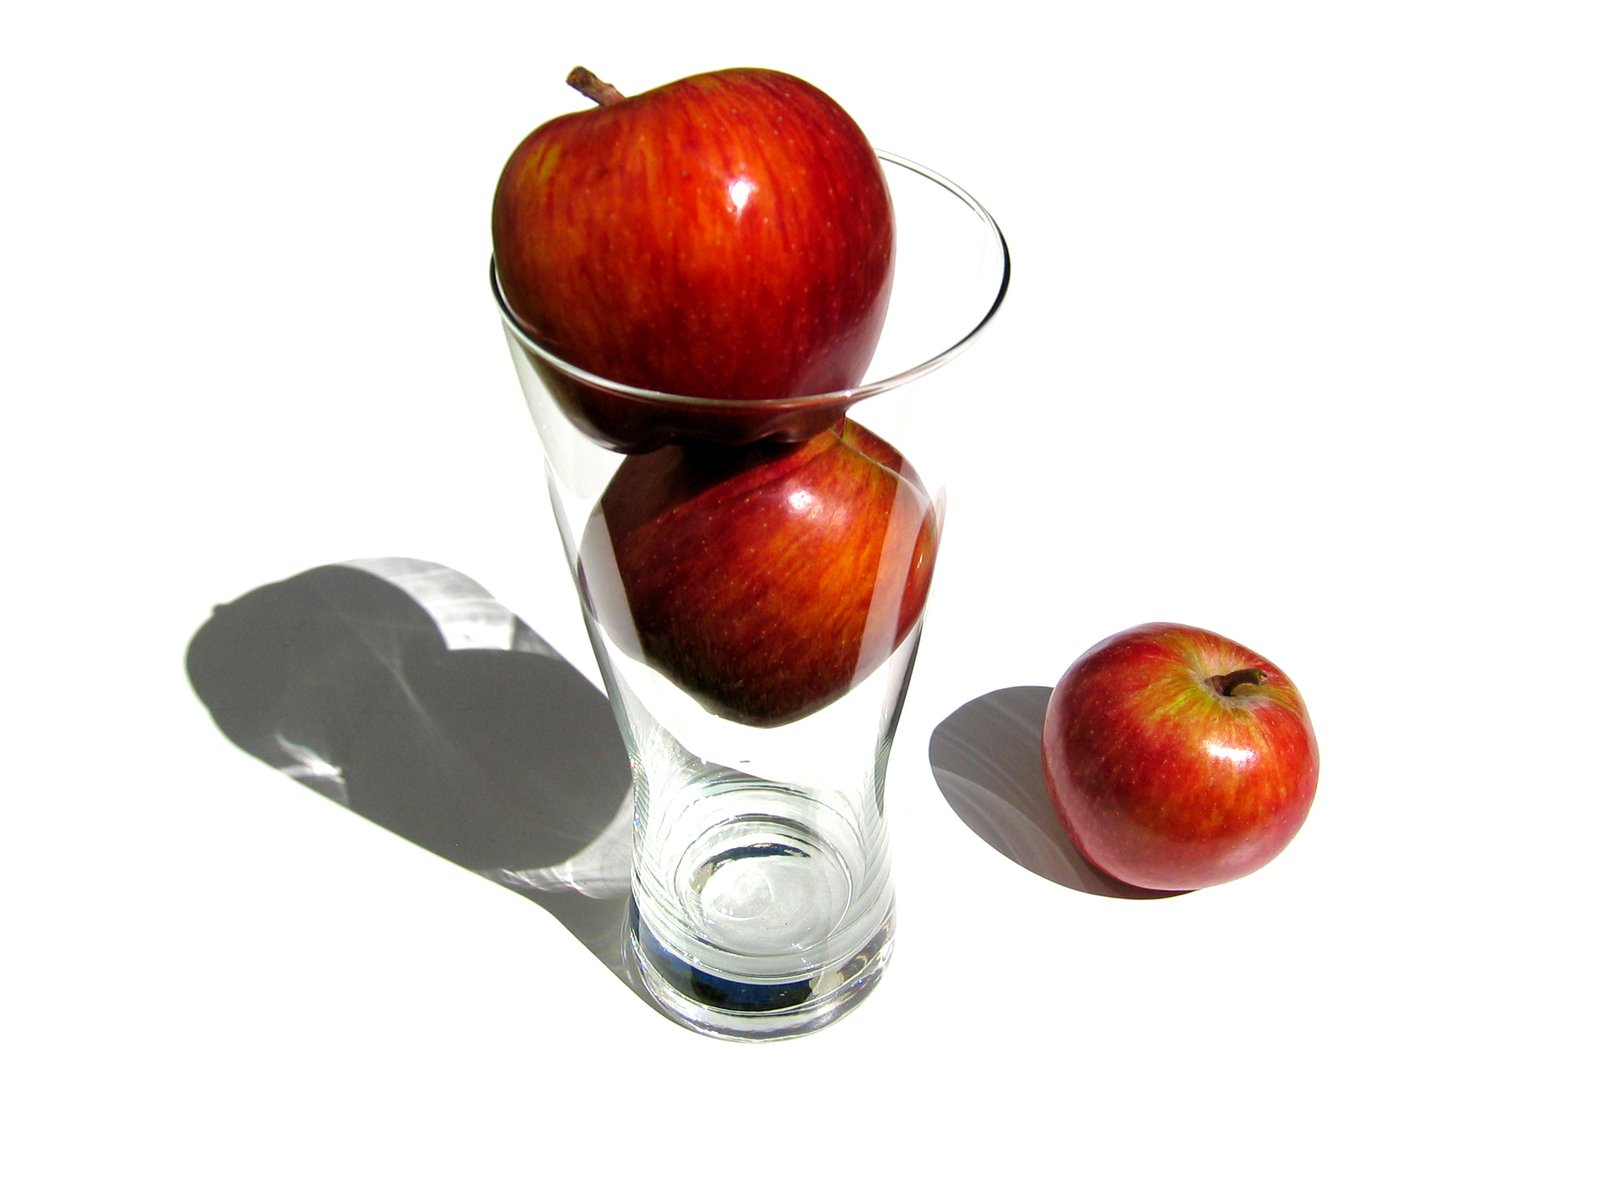 there is an apple in a glass vase